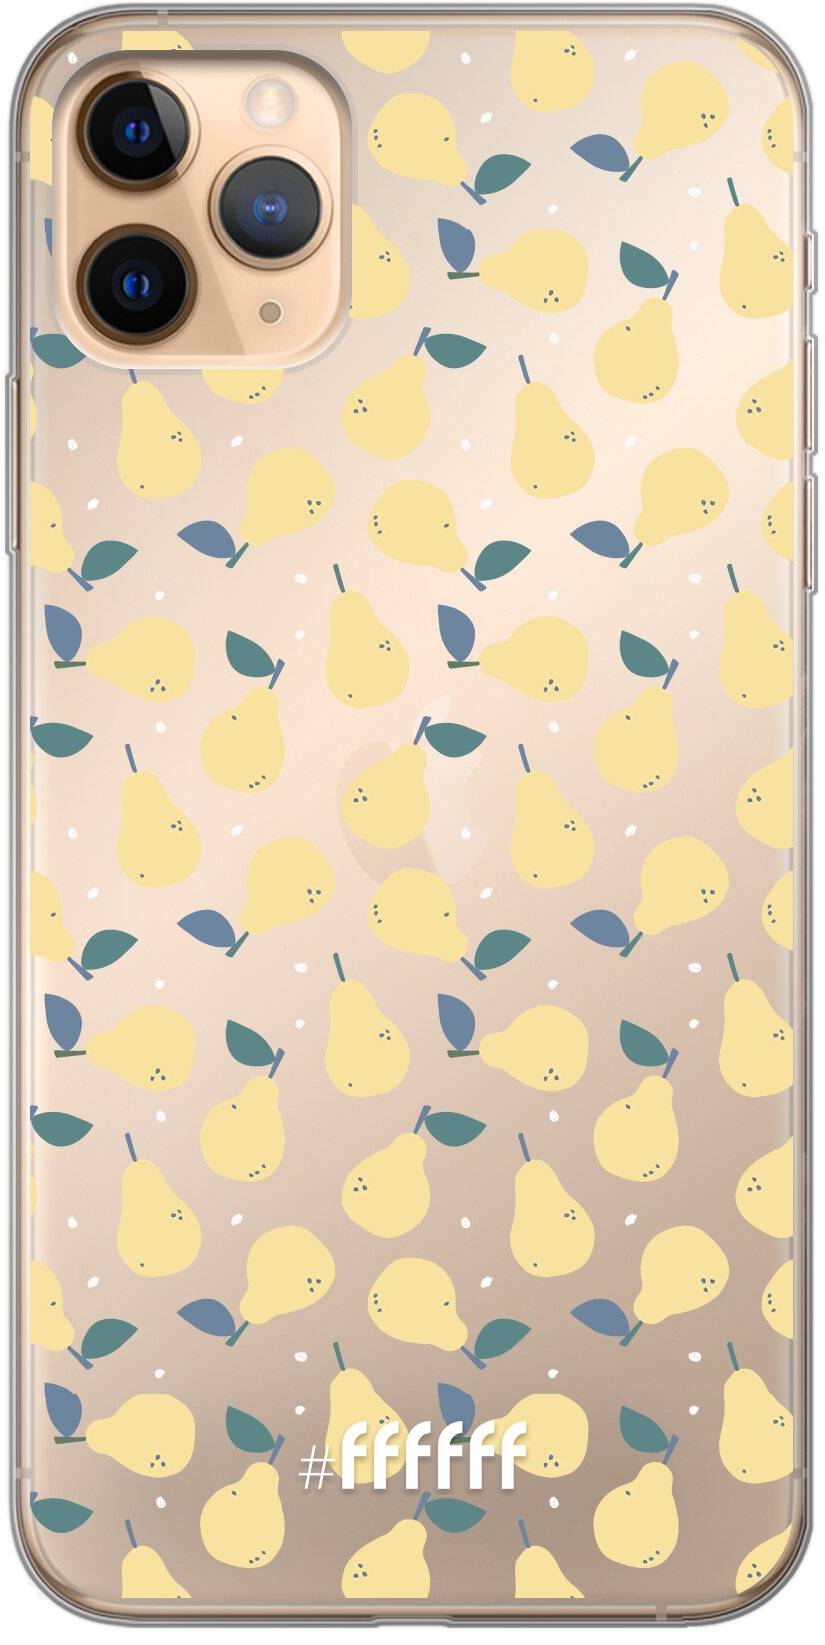 Pears iPhone 11 Pro Max